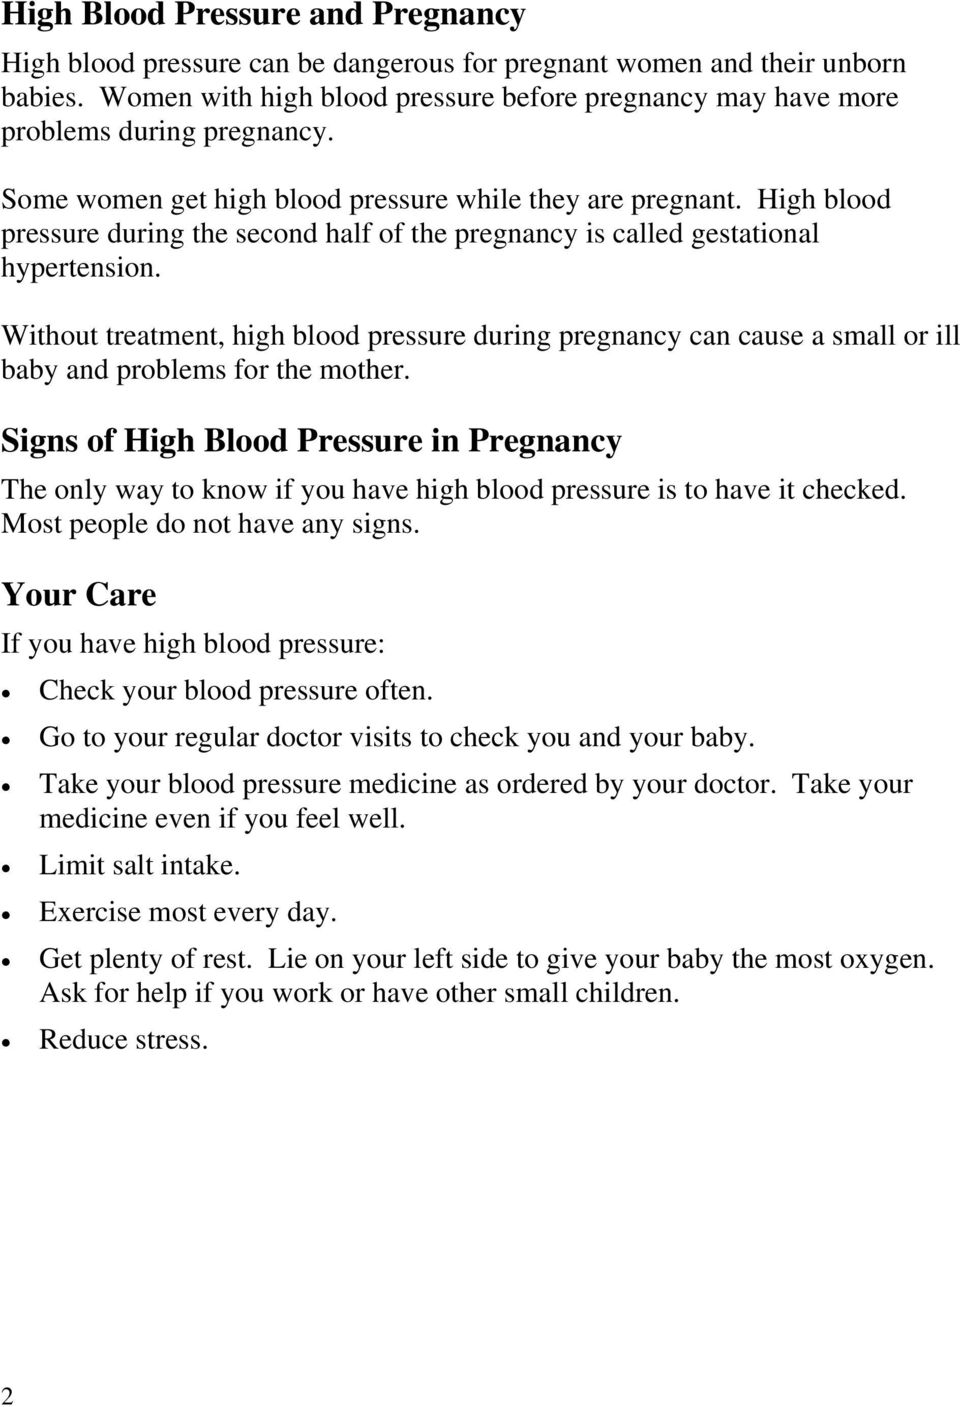 High blood pressure during the second half of the pregnancy is called gestational hypertension.